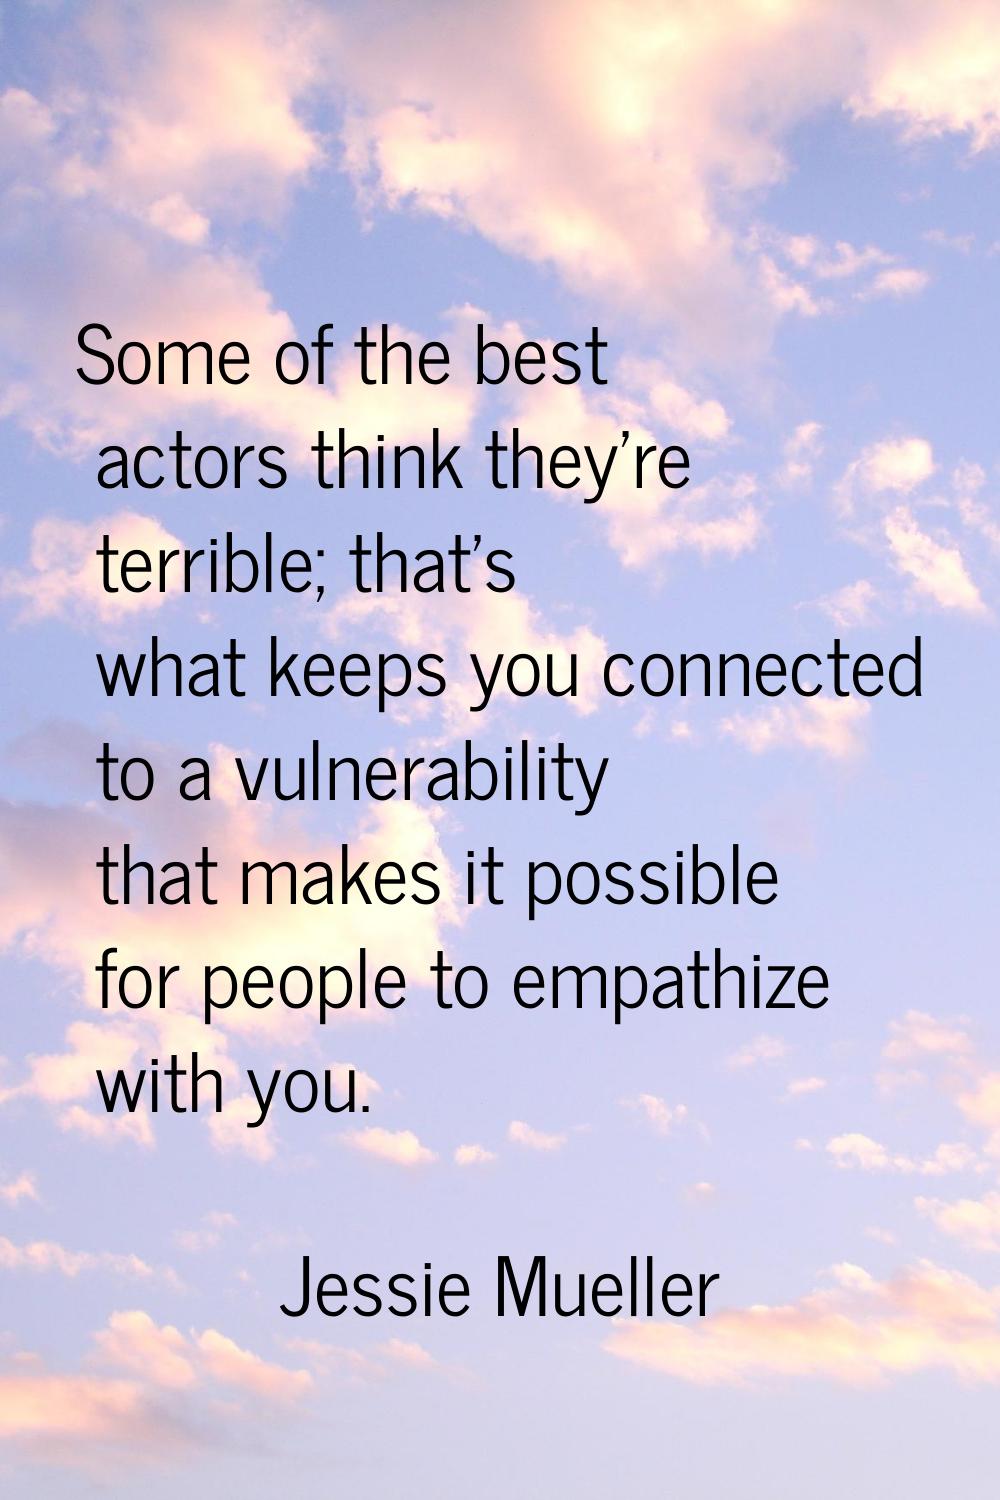 Some of the best actors think they're terrible; that's what keeps you connected to a vulnerability 